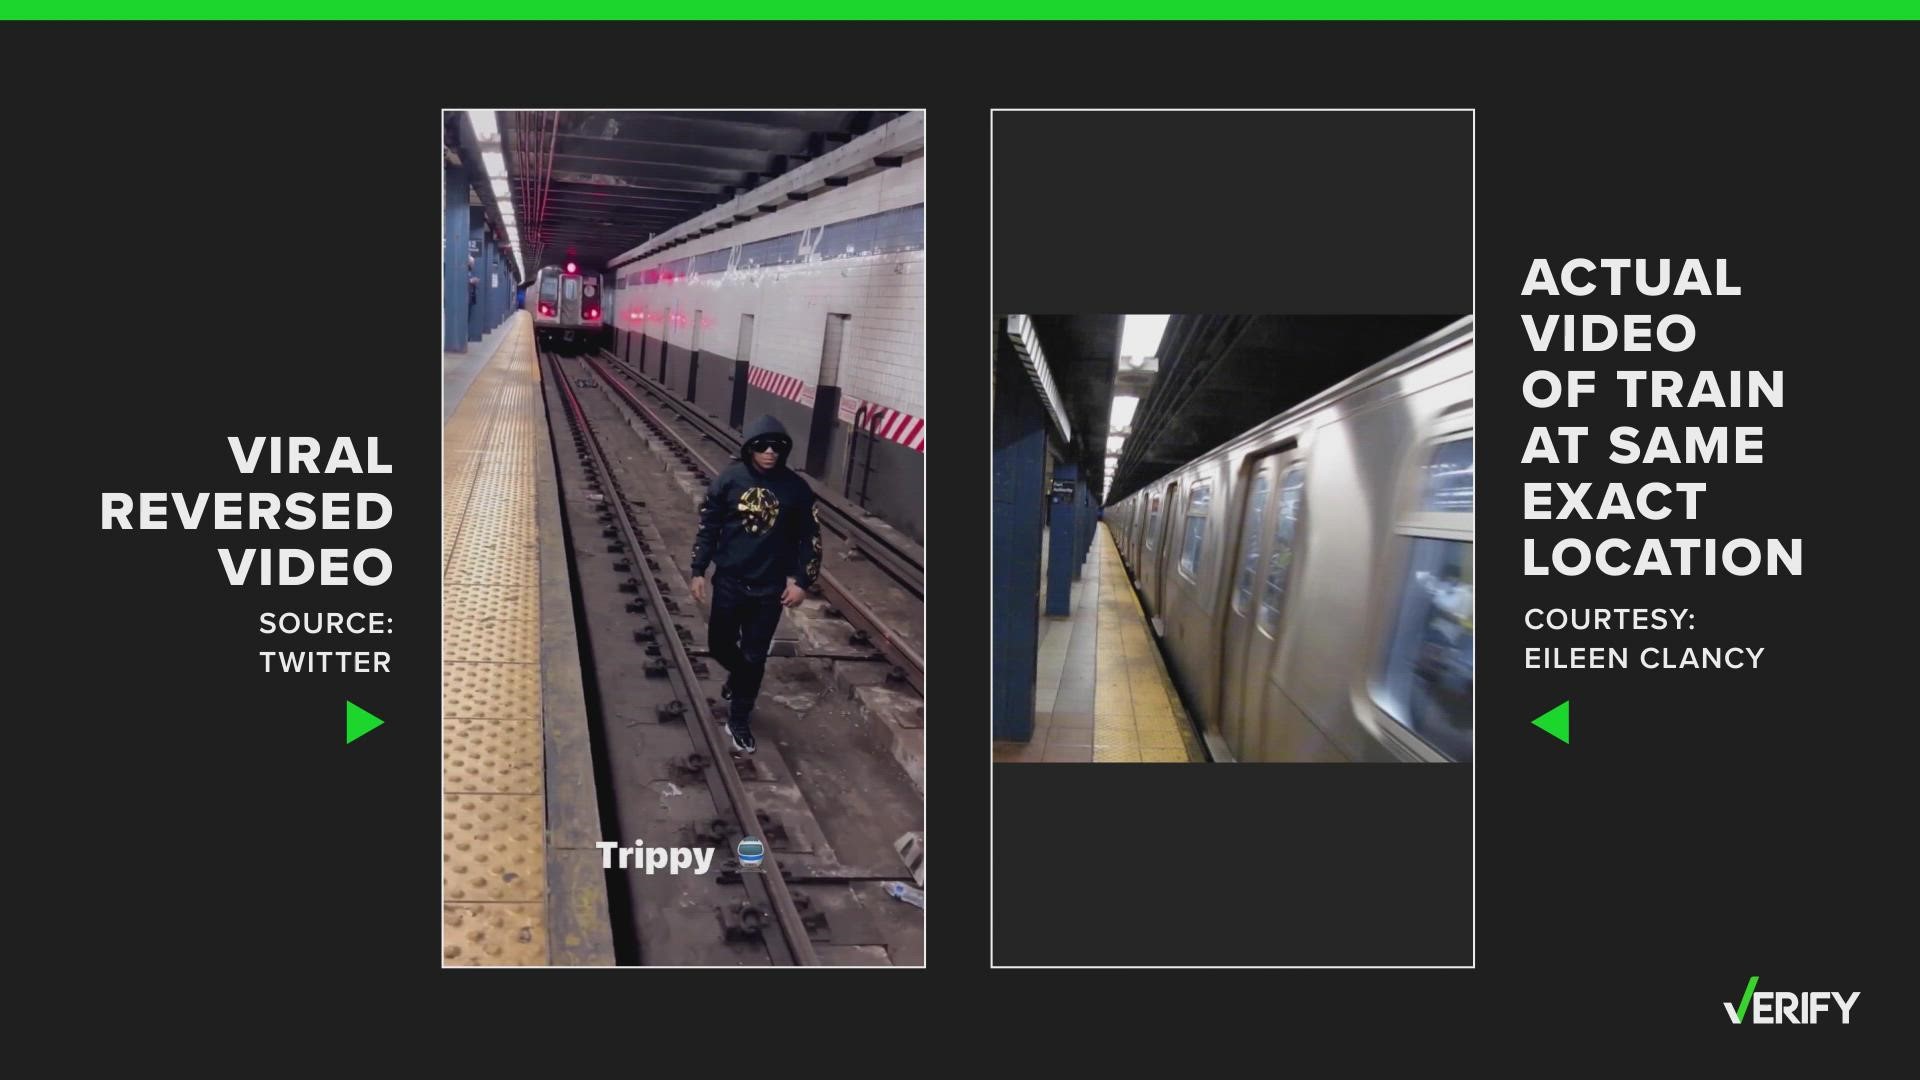 A viral stunt video claims to show a man jumping from NYC subway tracks onto the platform moments before a train passes, but it was edited.